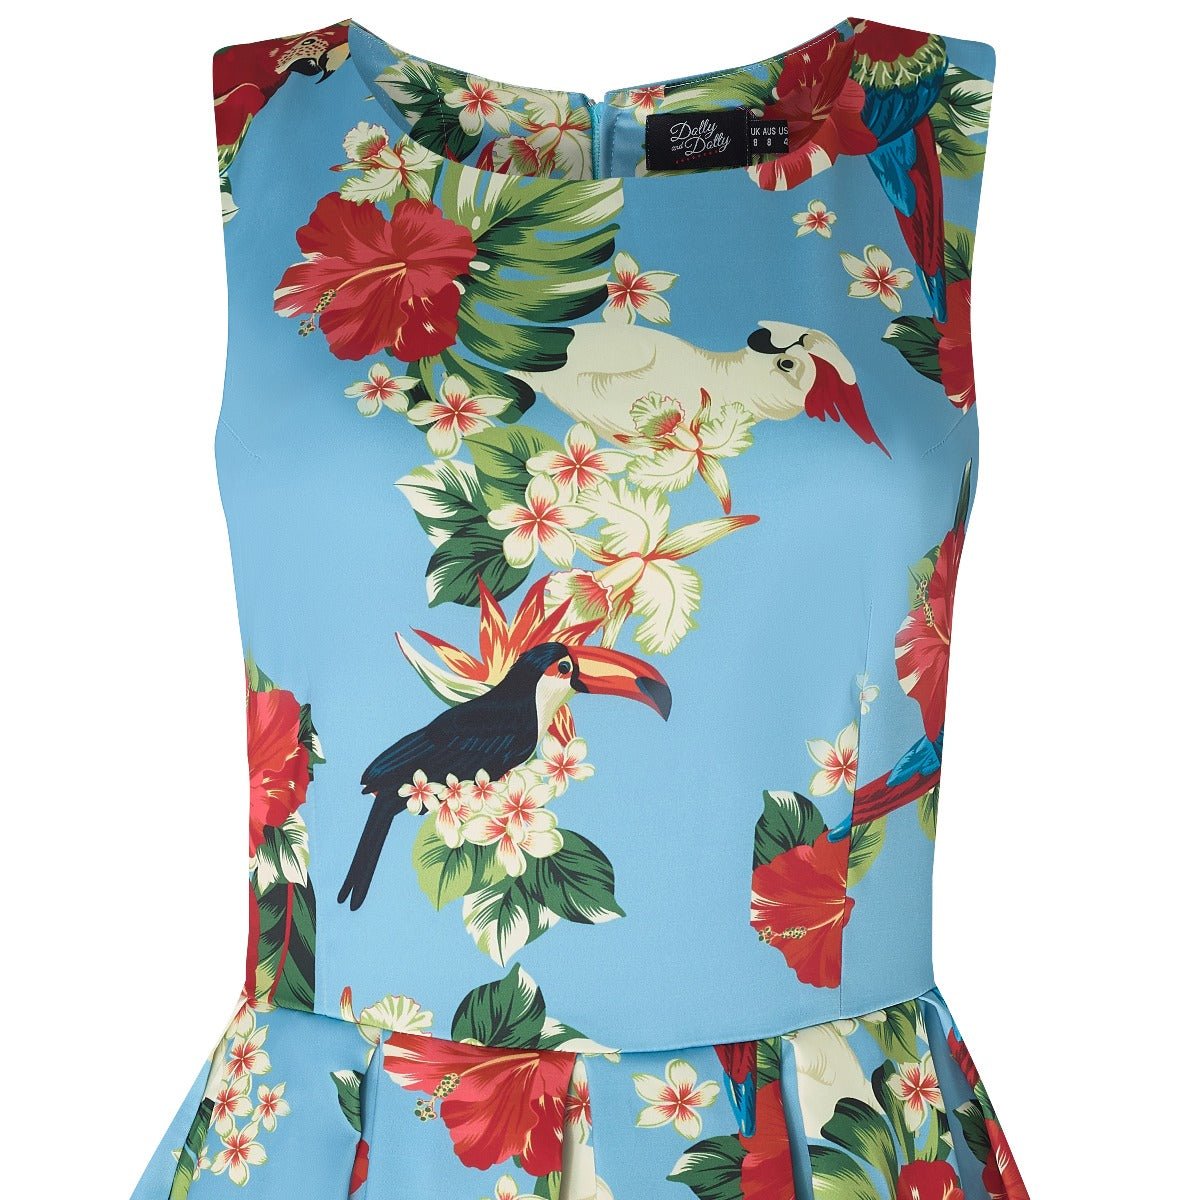 Blue dress with jungle birds and flowers, close up